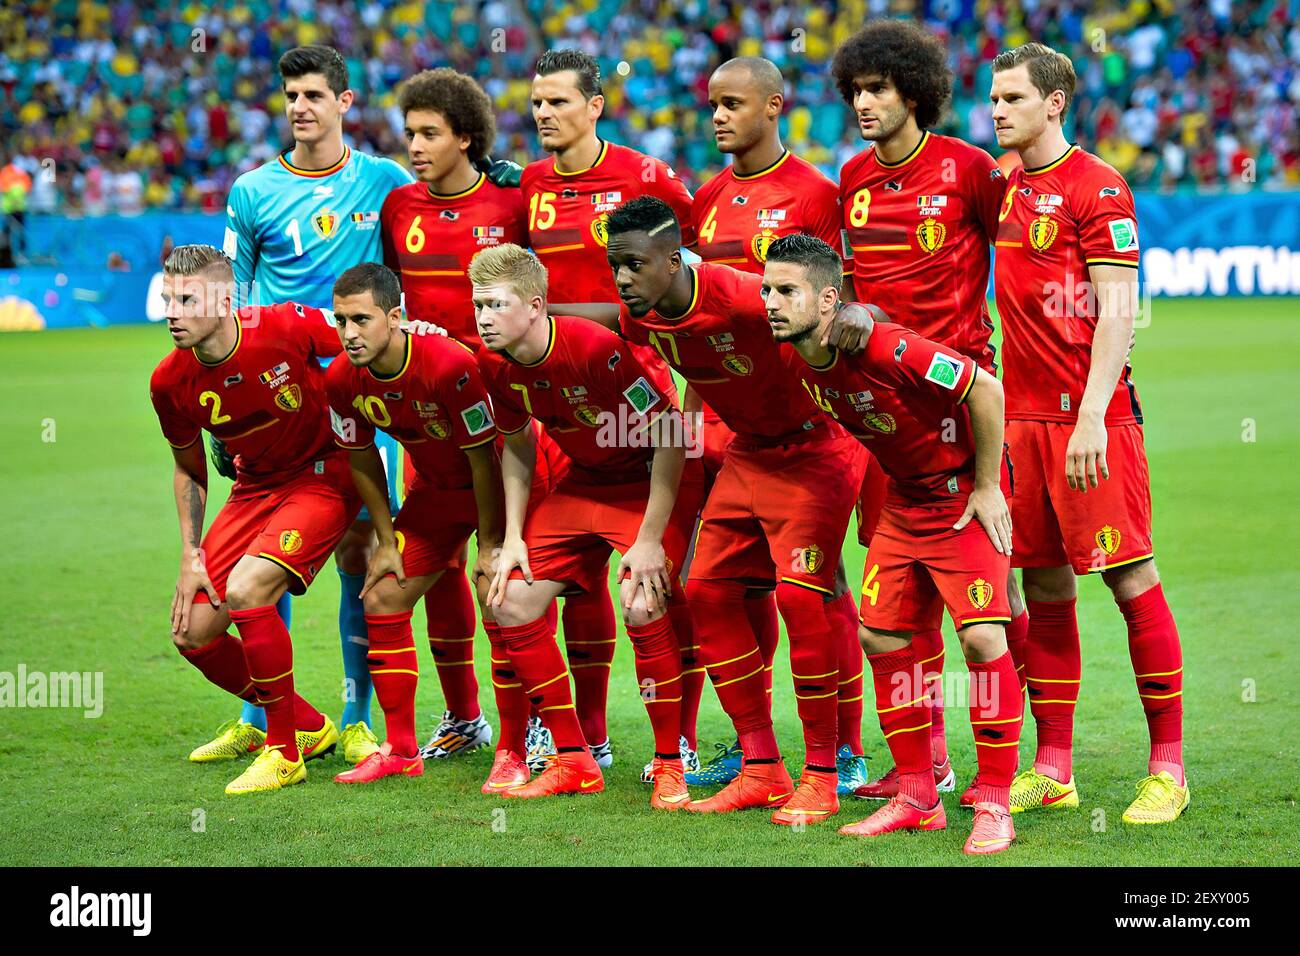 Belgium's team during the 2014 FIFA World Cup, Round of 16, soccer match  between Belgium and USA, in Arena Fonte Nova Stadium in Salvador, Brazil,  on July 1, 2014. Photo by Roberto